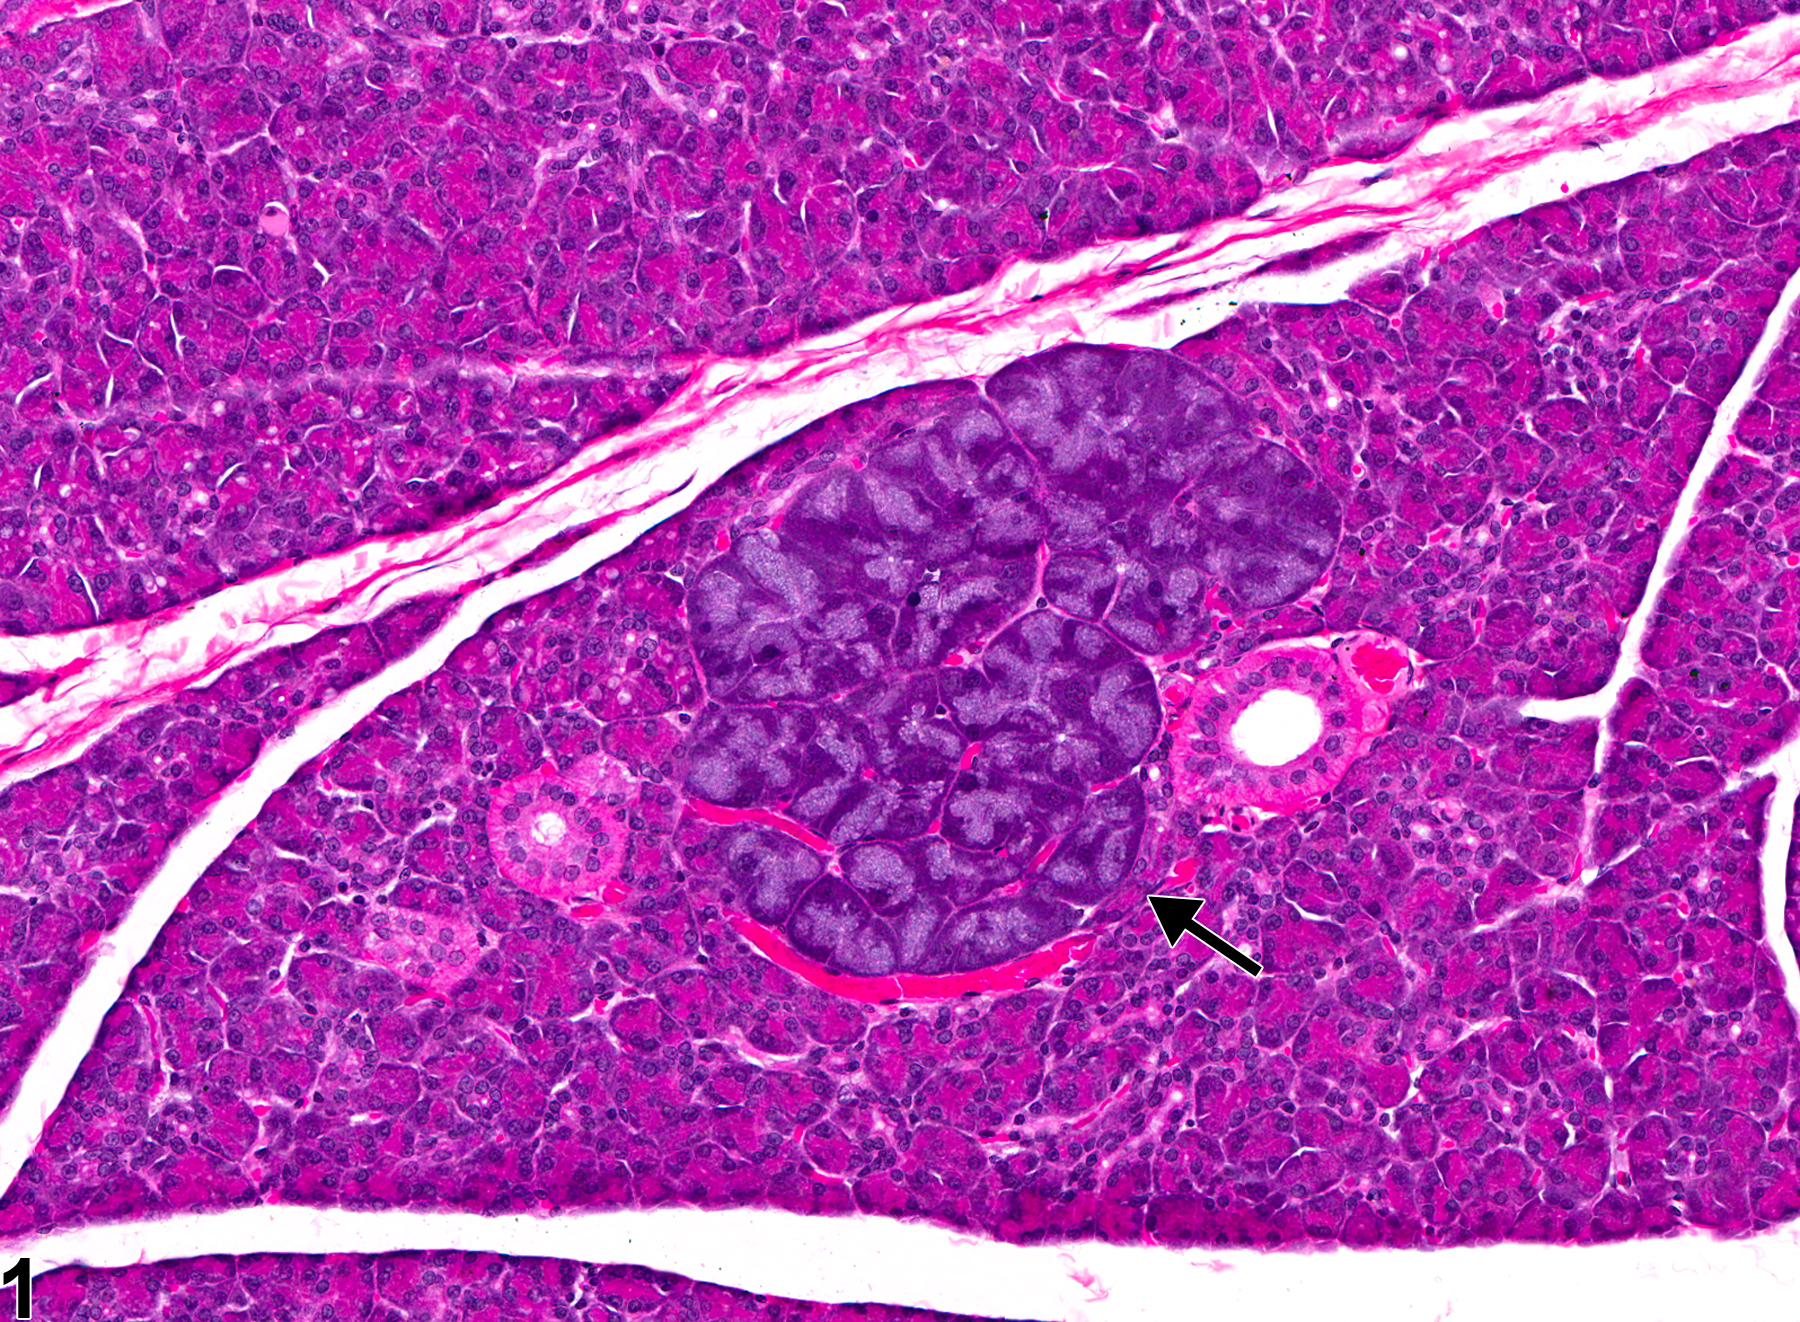 Image of basophilic hypertrophic focus in the parotid salivary gland from a female F344/N rat in a chronic study